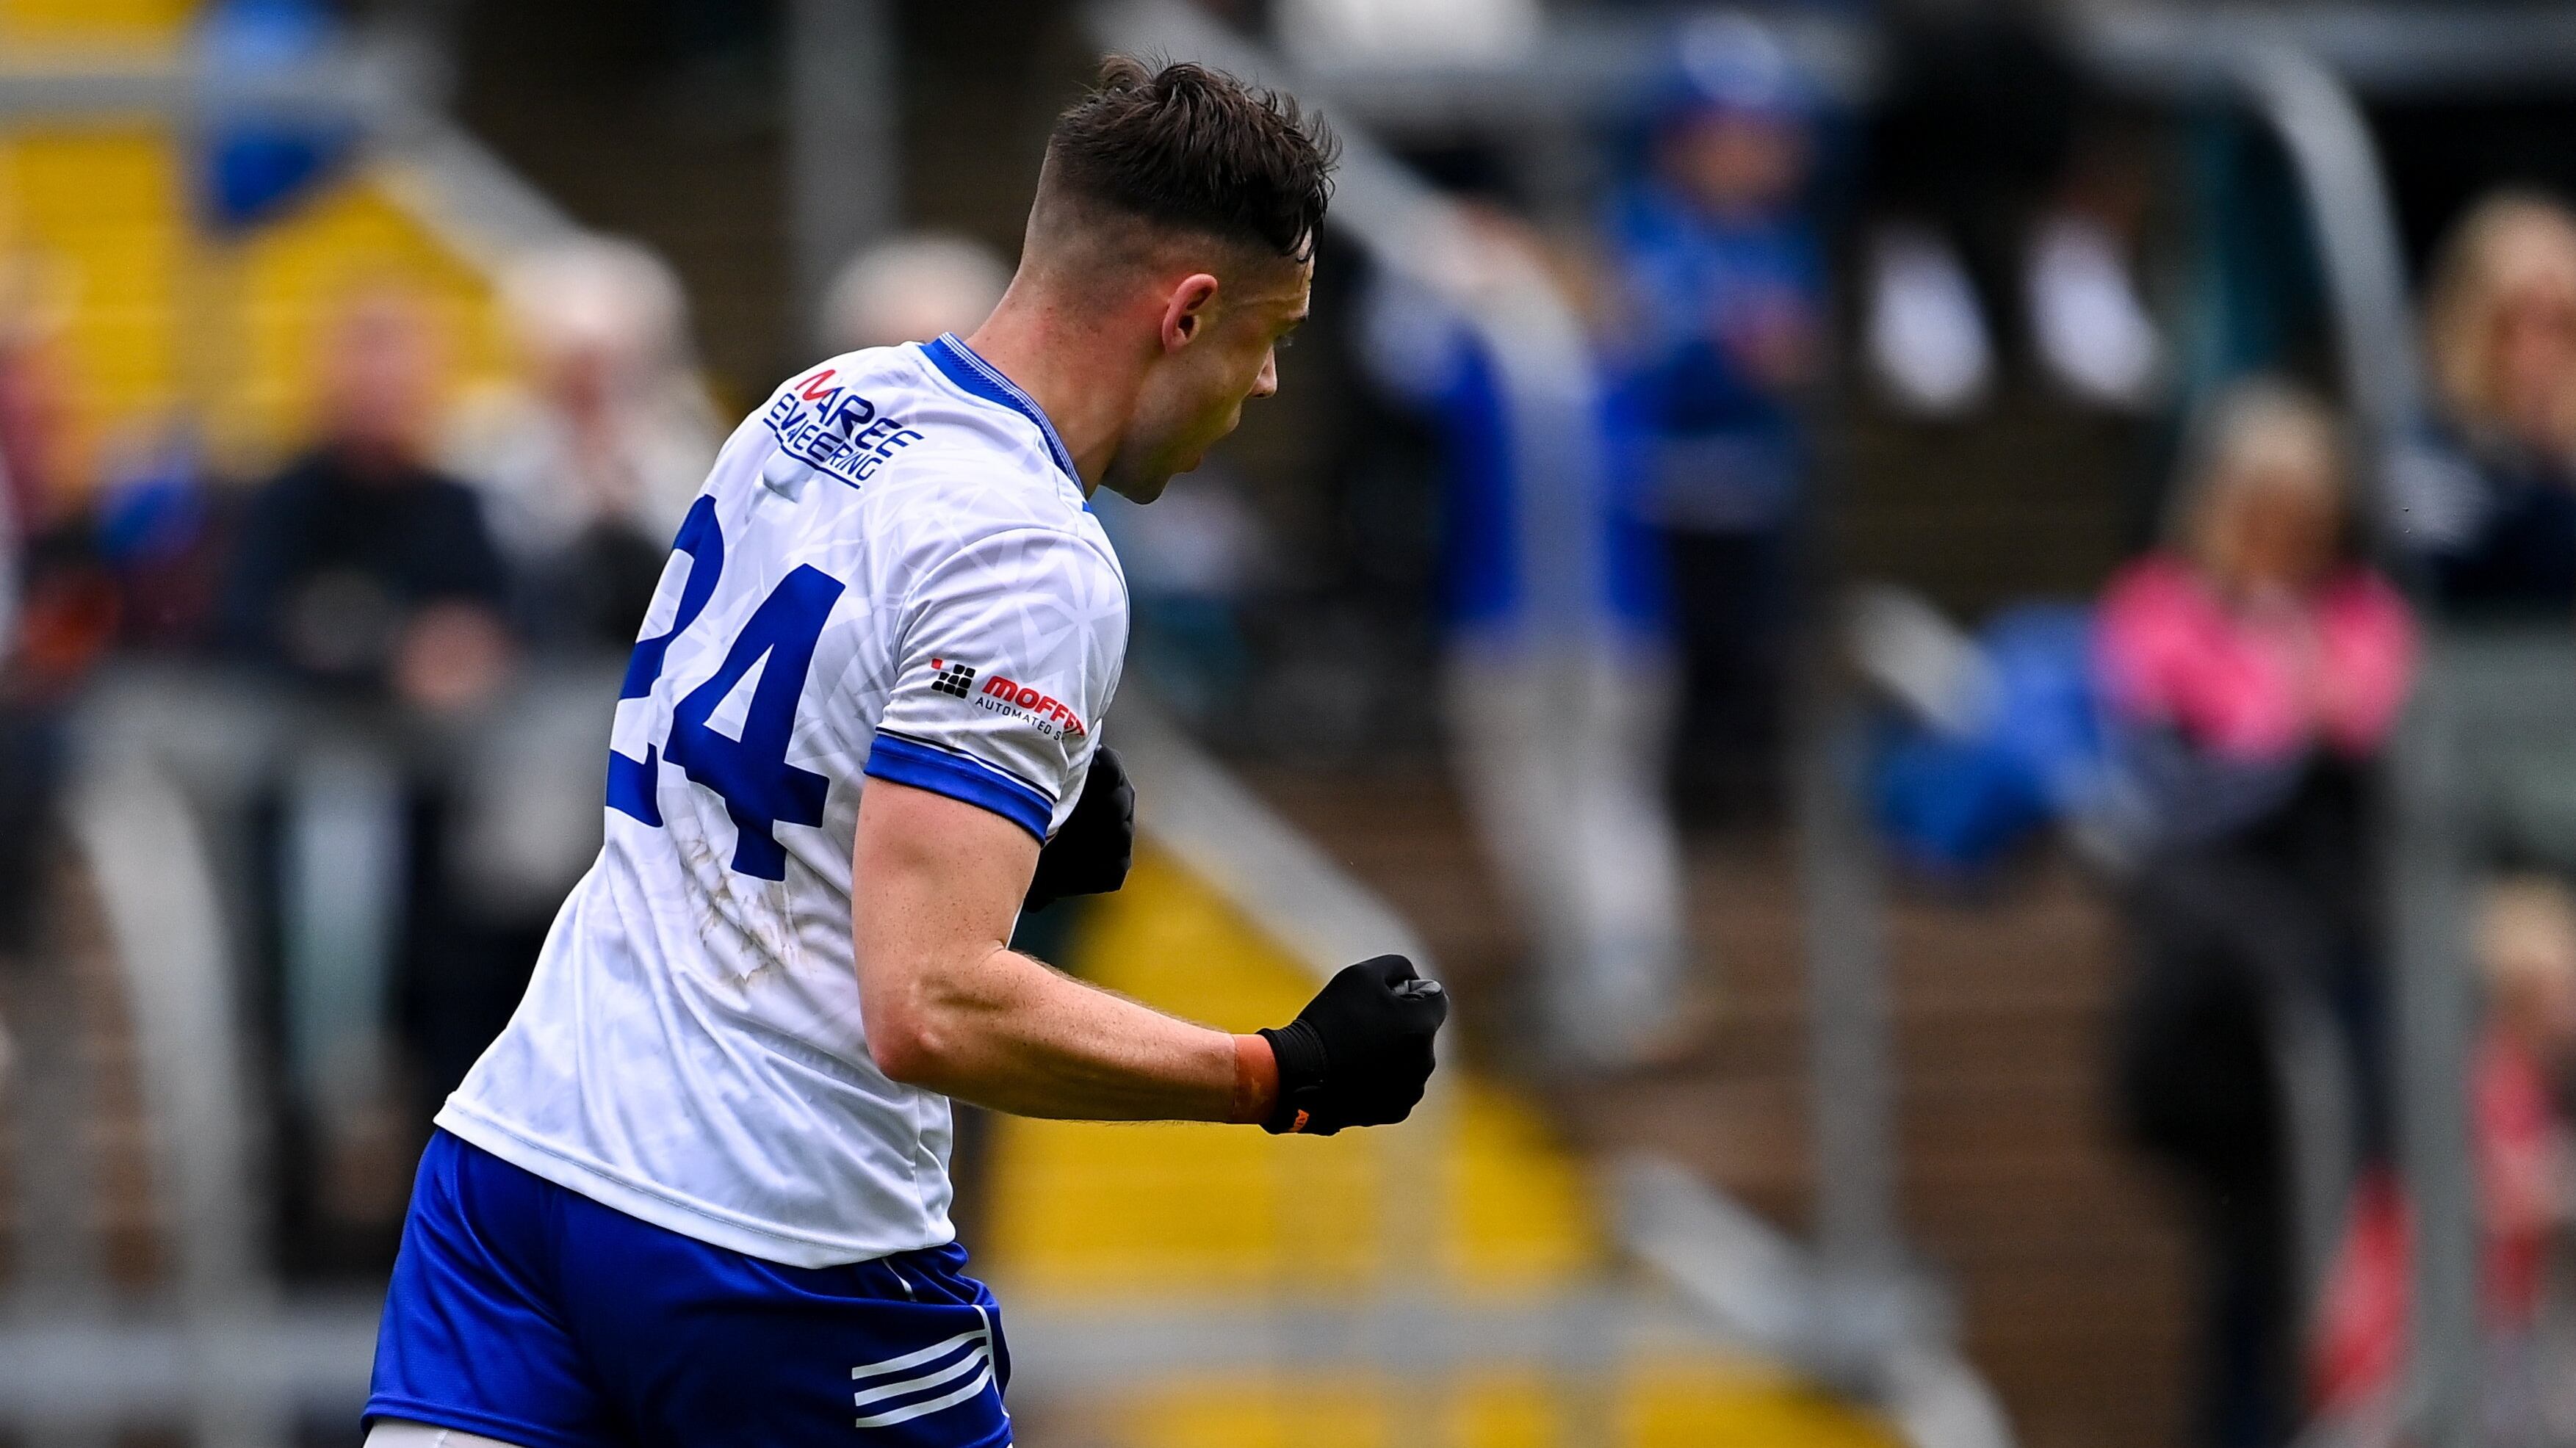 Barry McBennett celebrates after scoring Monaghan's goal during the GAA Football All-Ireland Senior Championship Round 3 match between Monaghan and Meath at Kingspan Breffni in Cavan. Photo by Ben McShane/Sportsfile